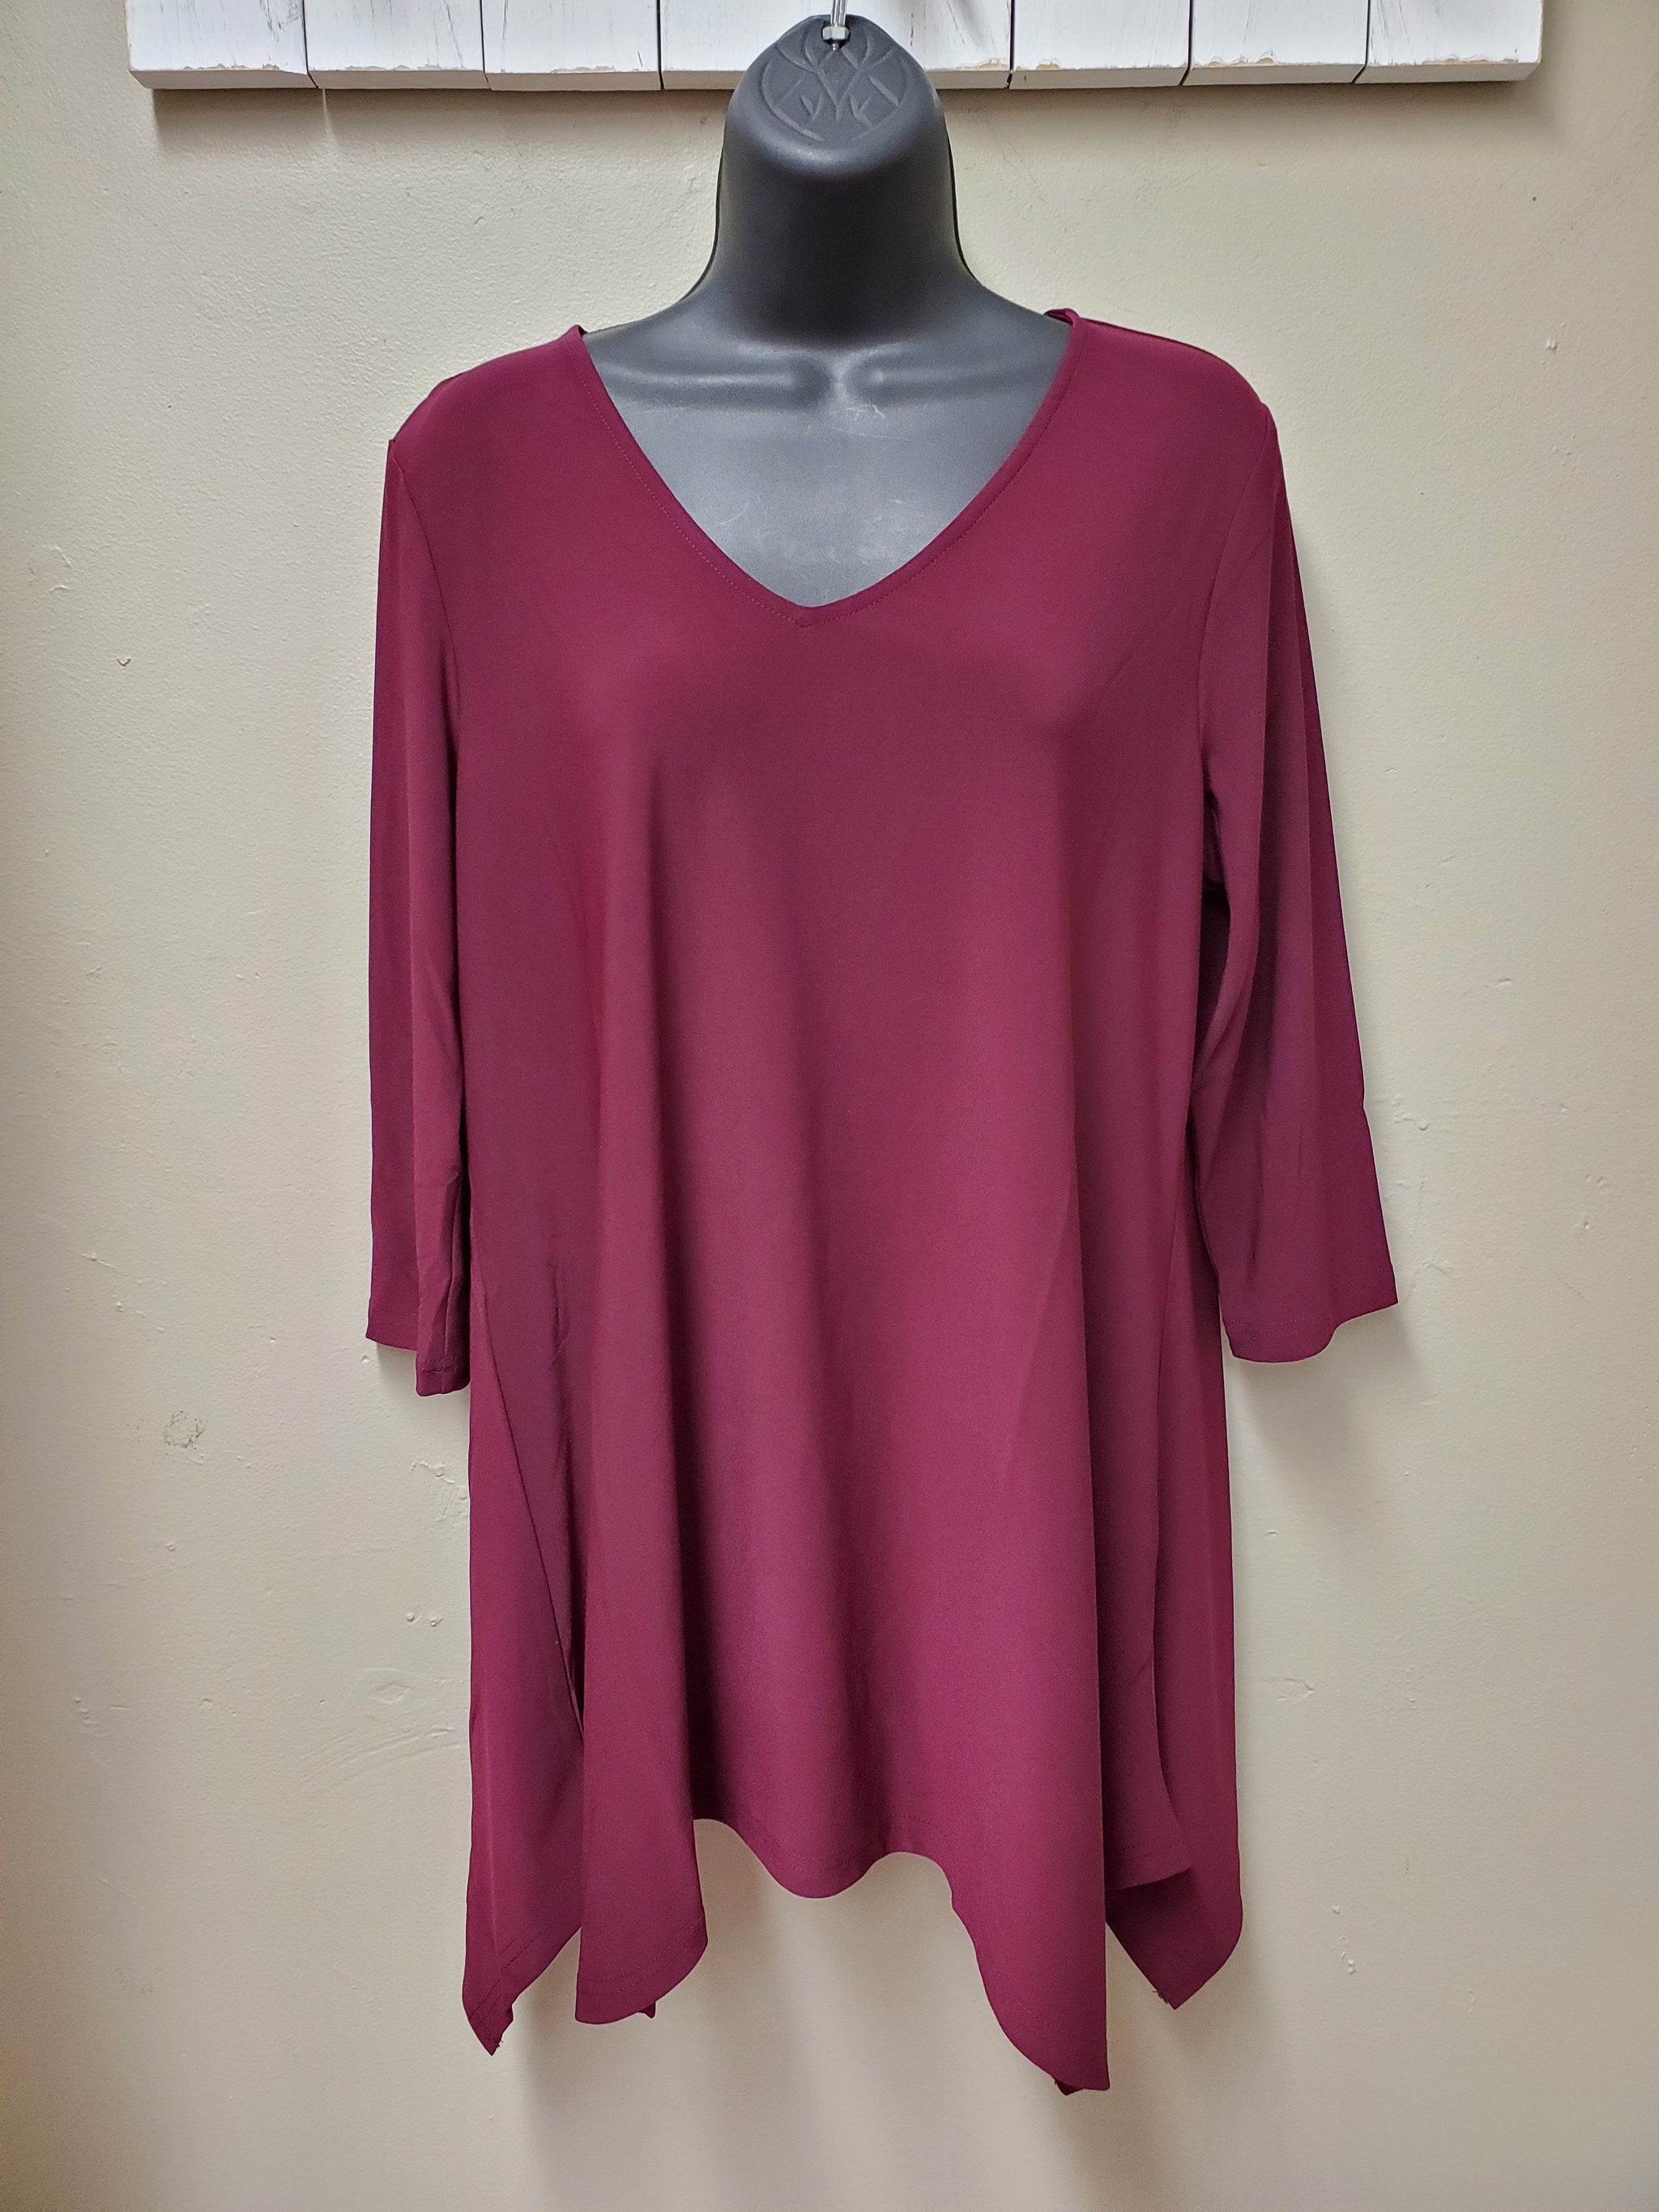 BEST SELLER COLORS - Flattering Fit & Flair Tunic with 3/4 Sleeve - You ...